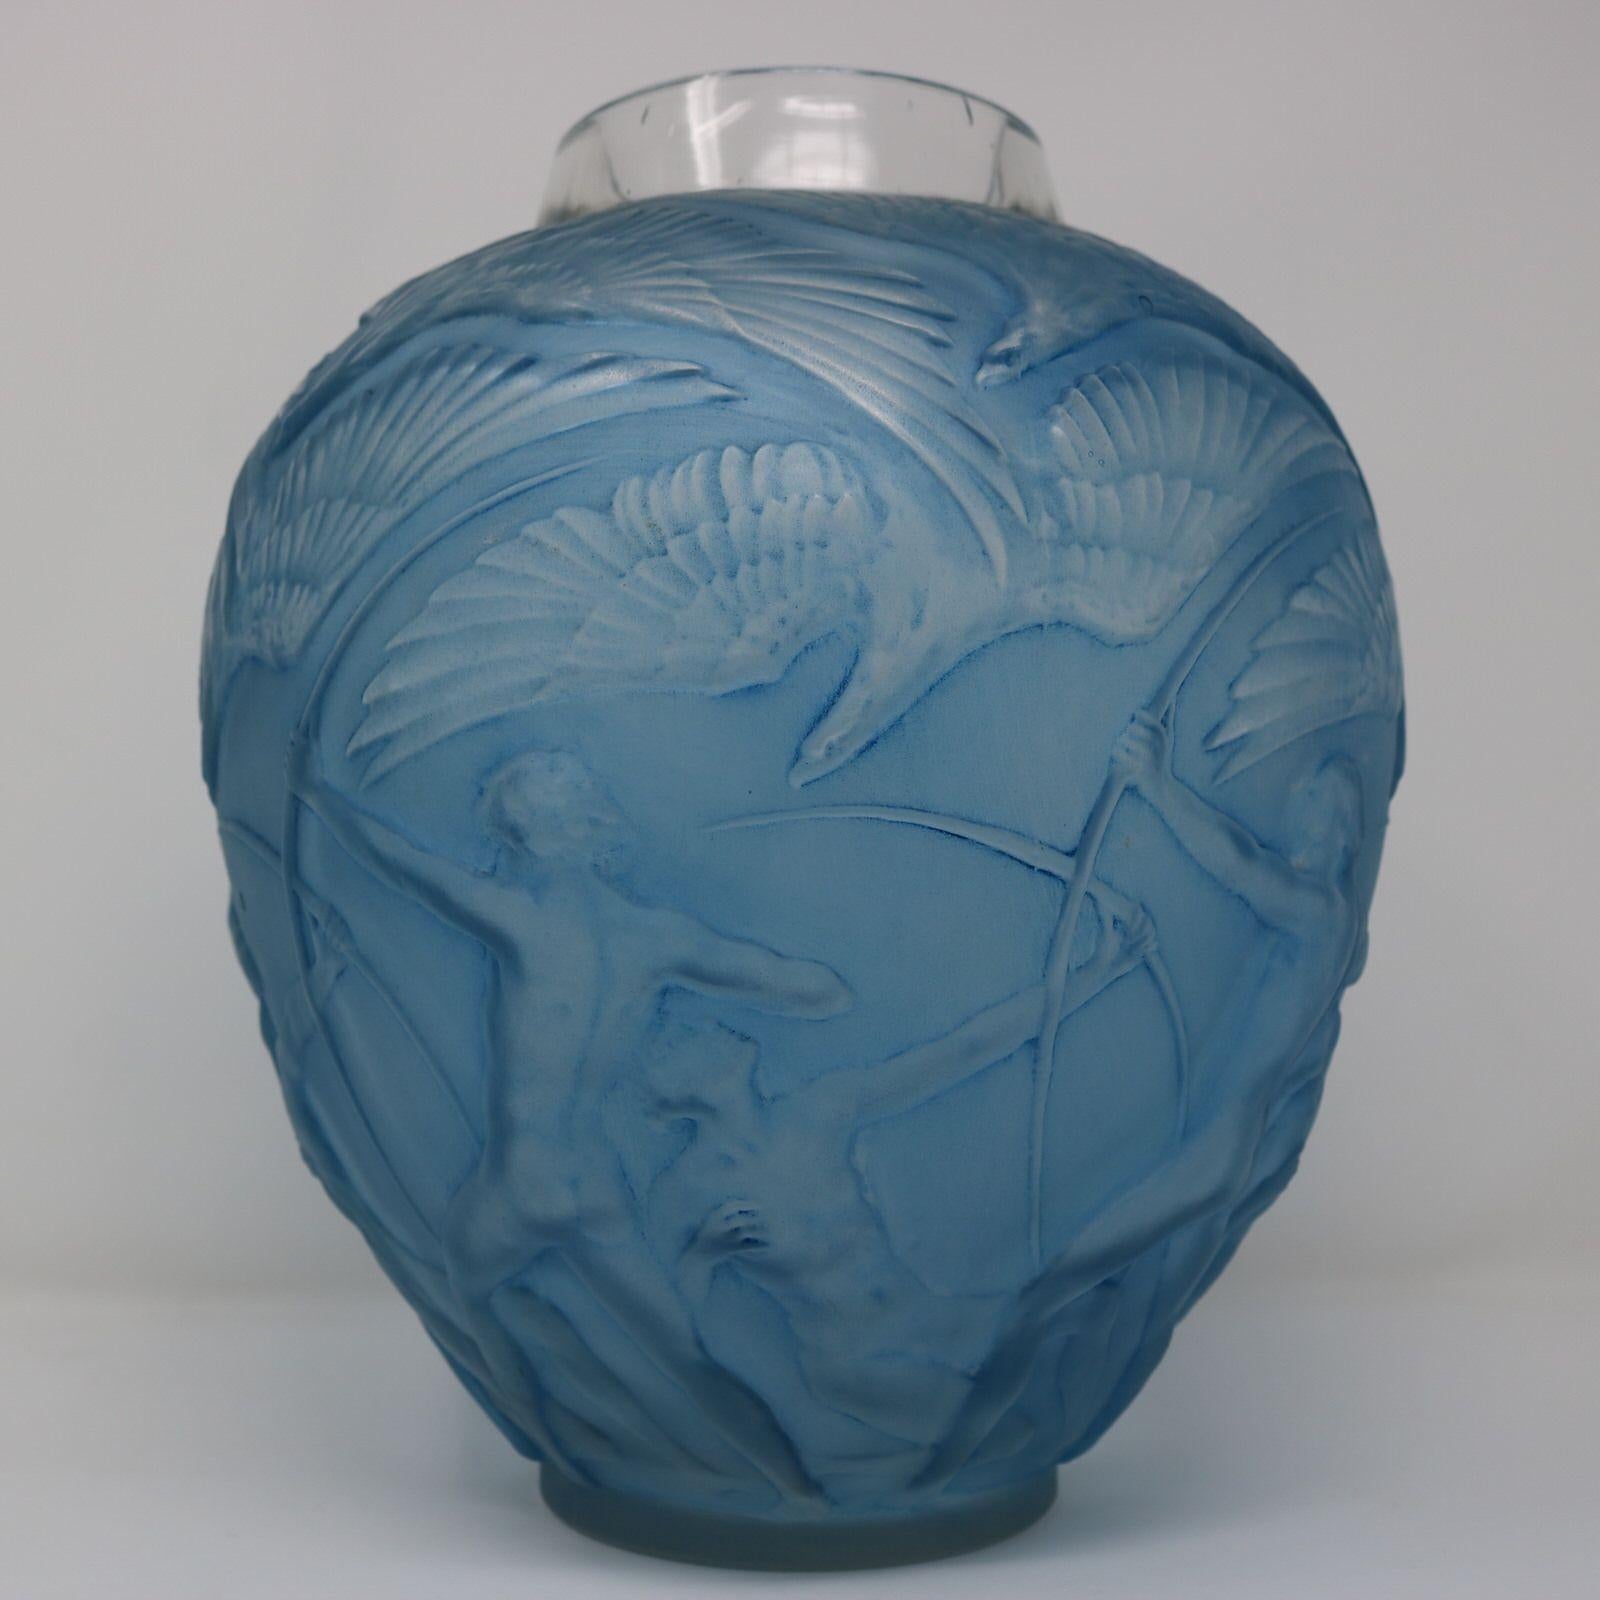 Rene Lalique Glass Archers Vase, Blue Stained 1